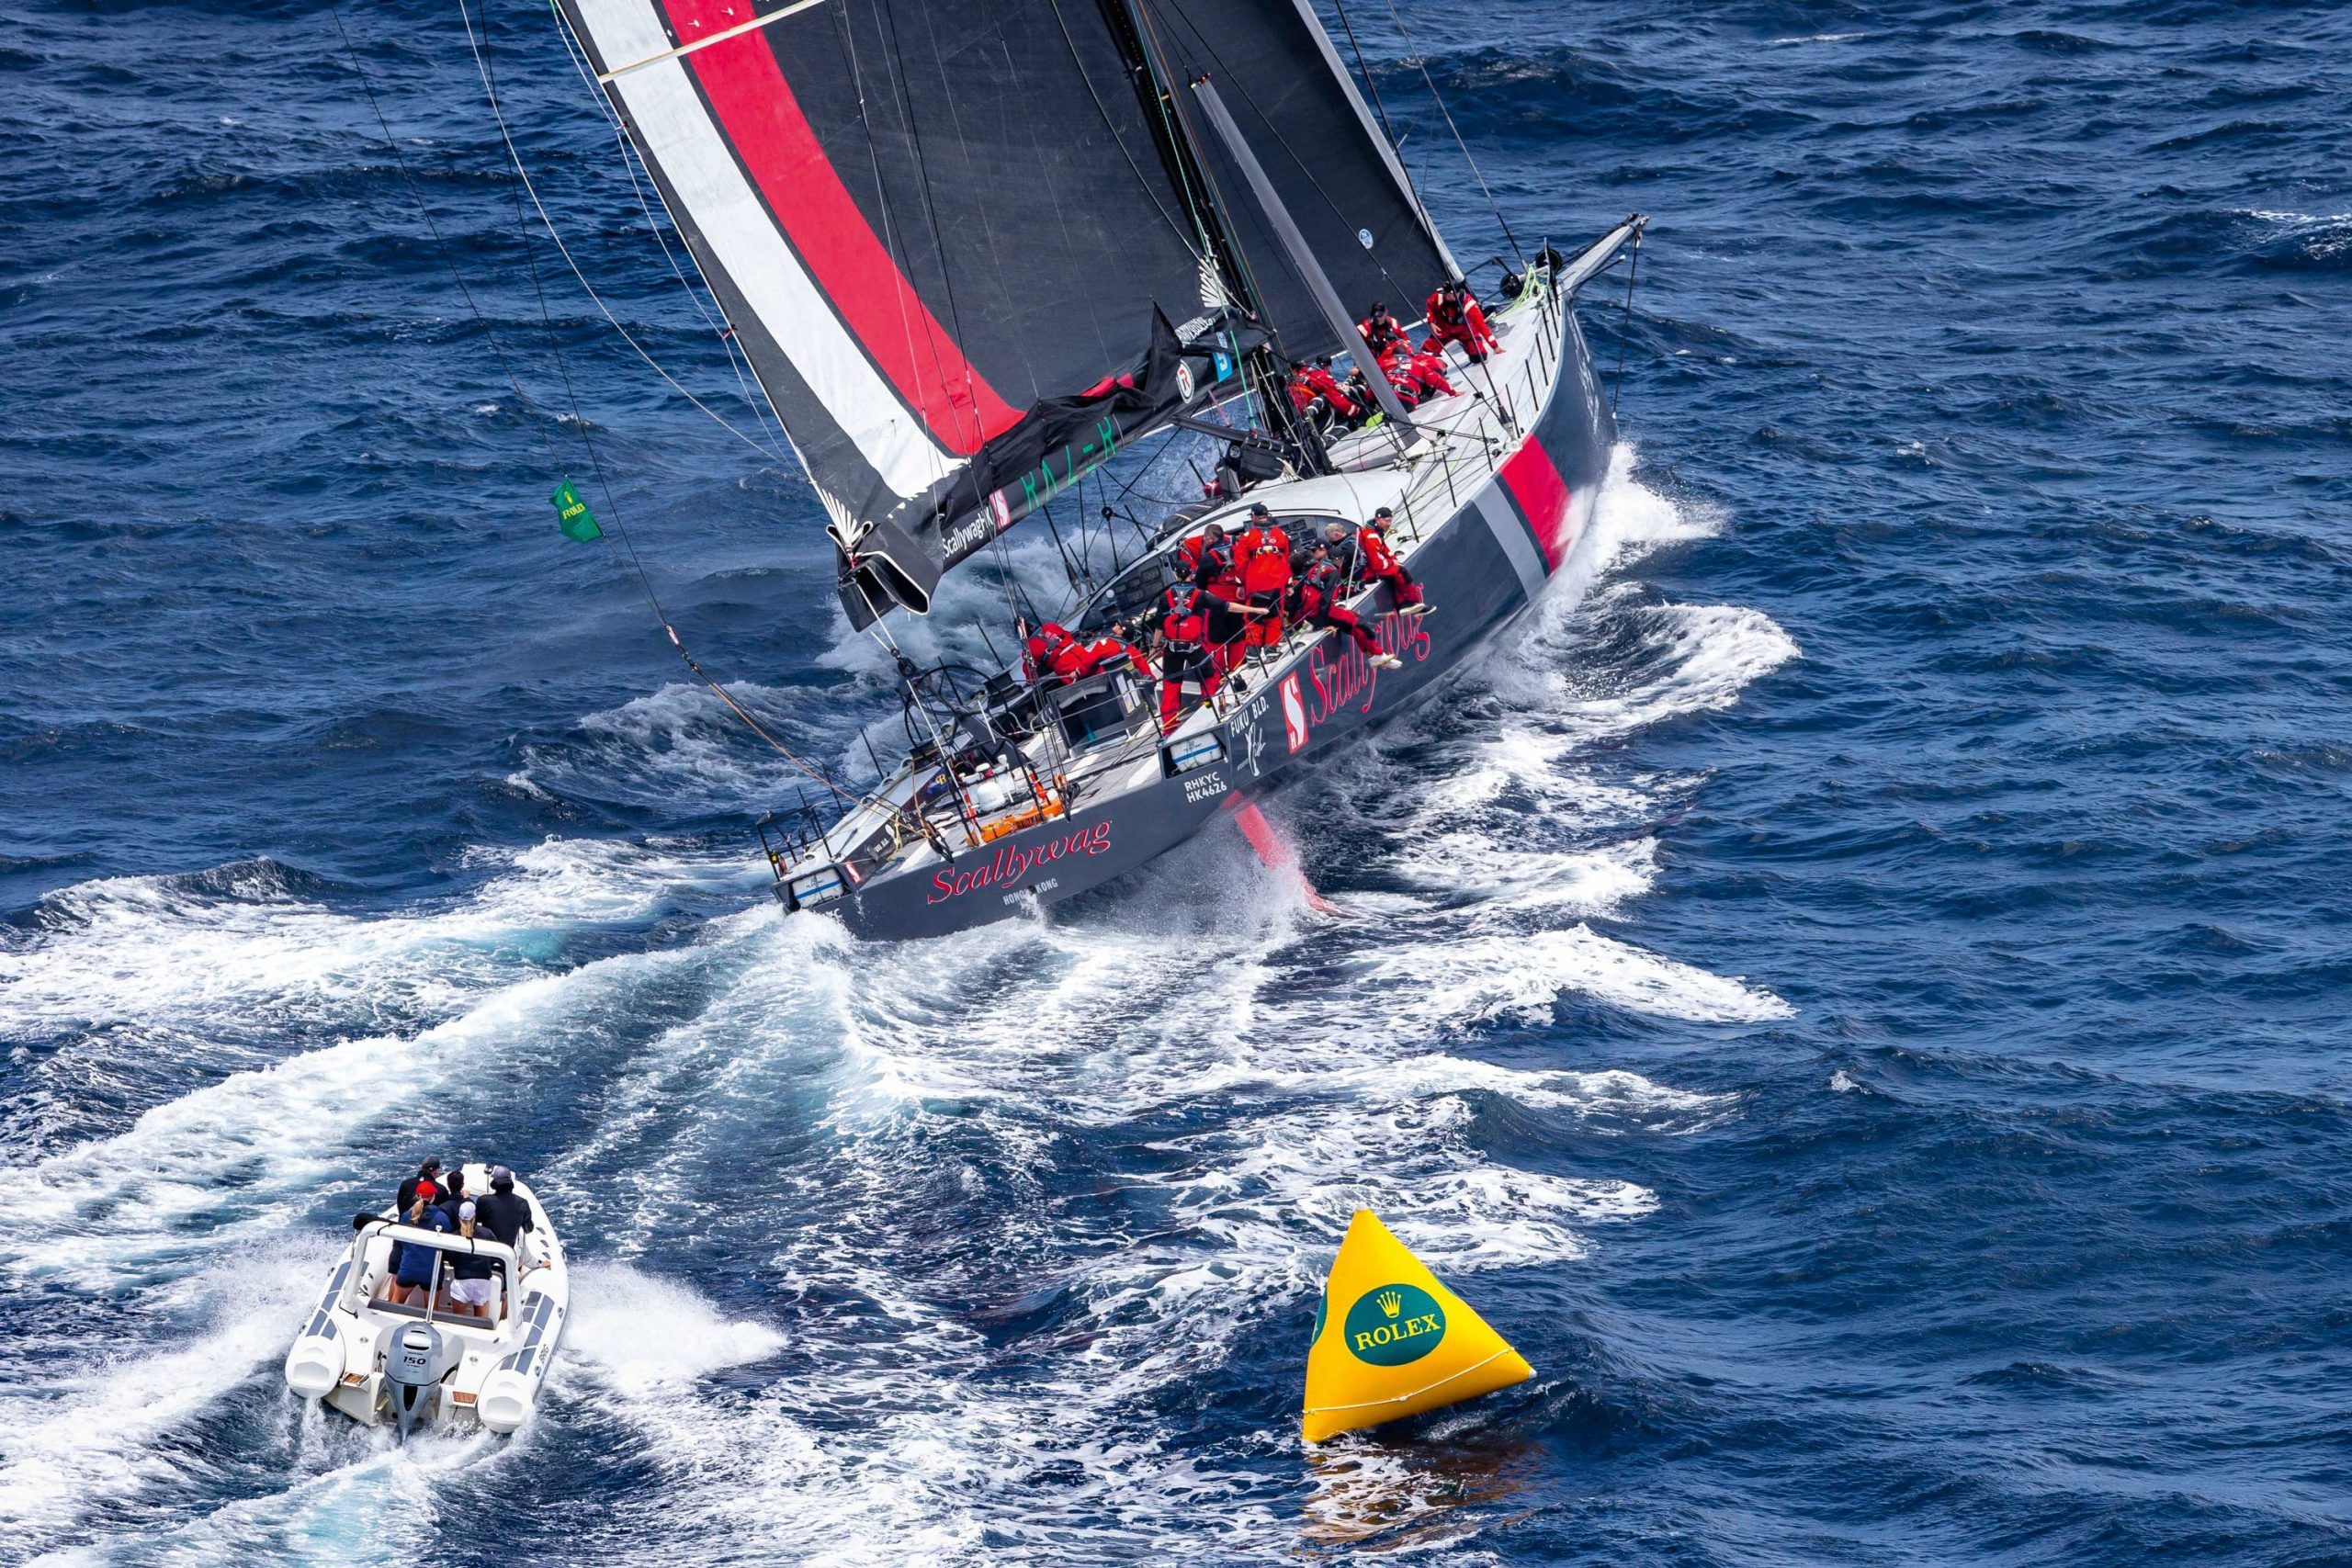 Rolex has been keeping the grueling 1,163-kilometer race on time since 2002